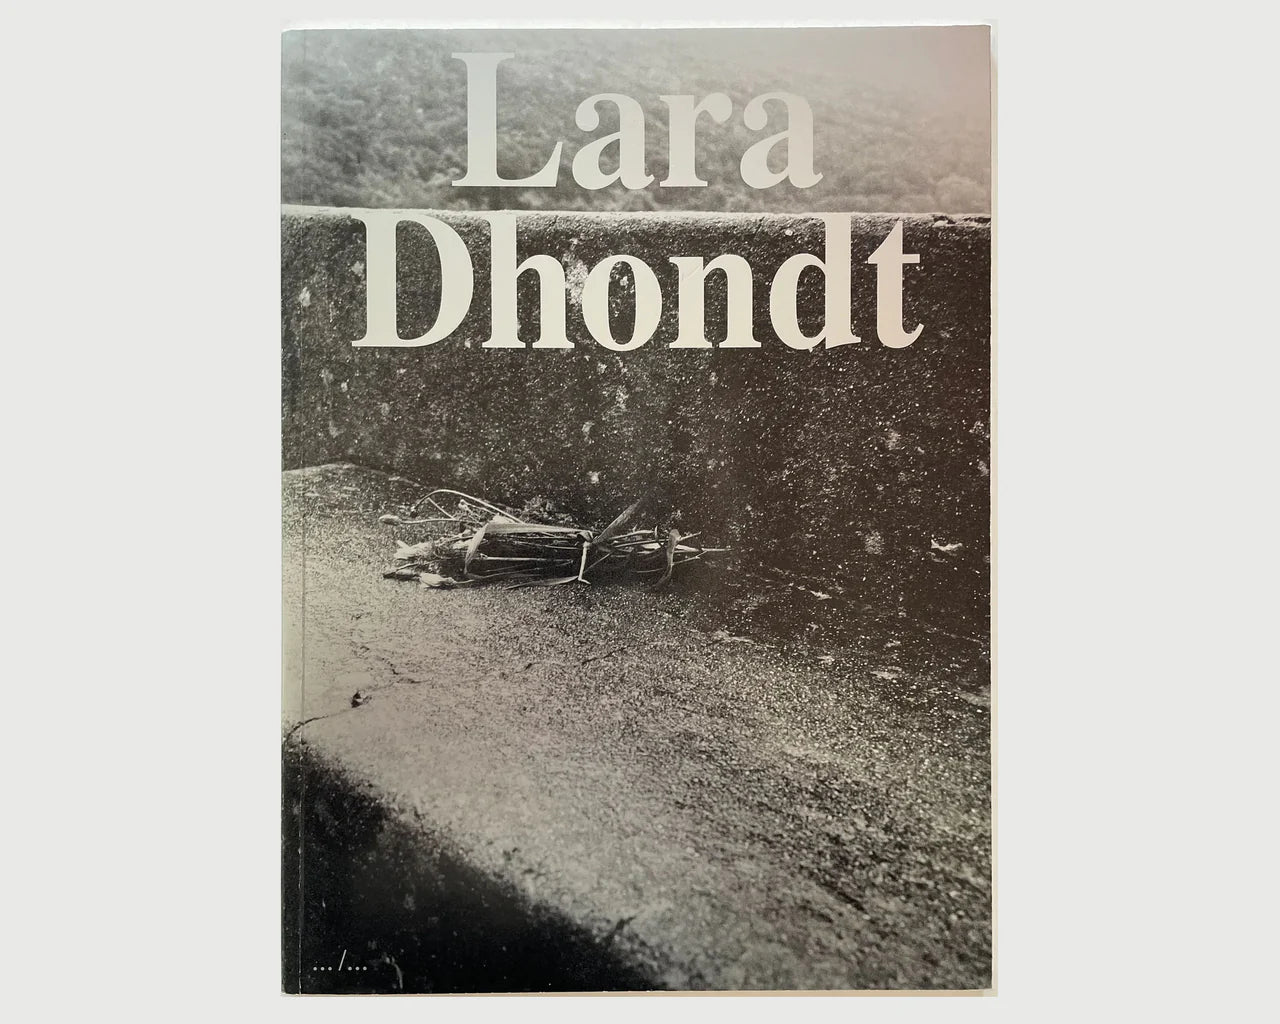 Wandering off by Lara Dhondt